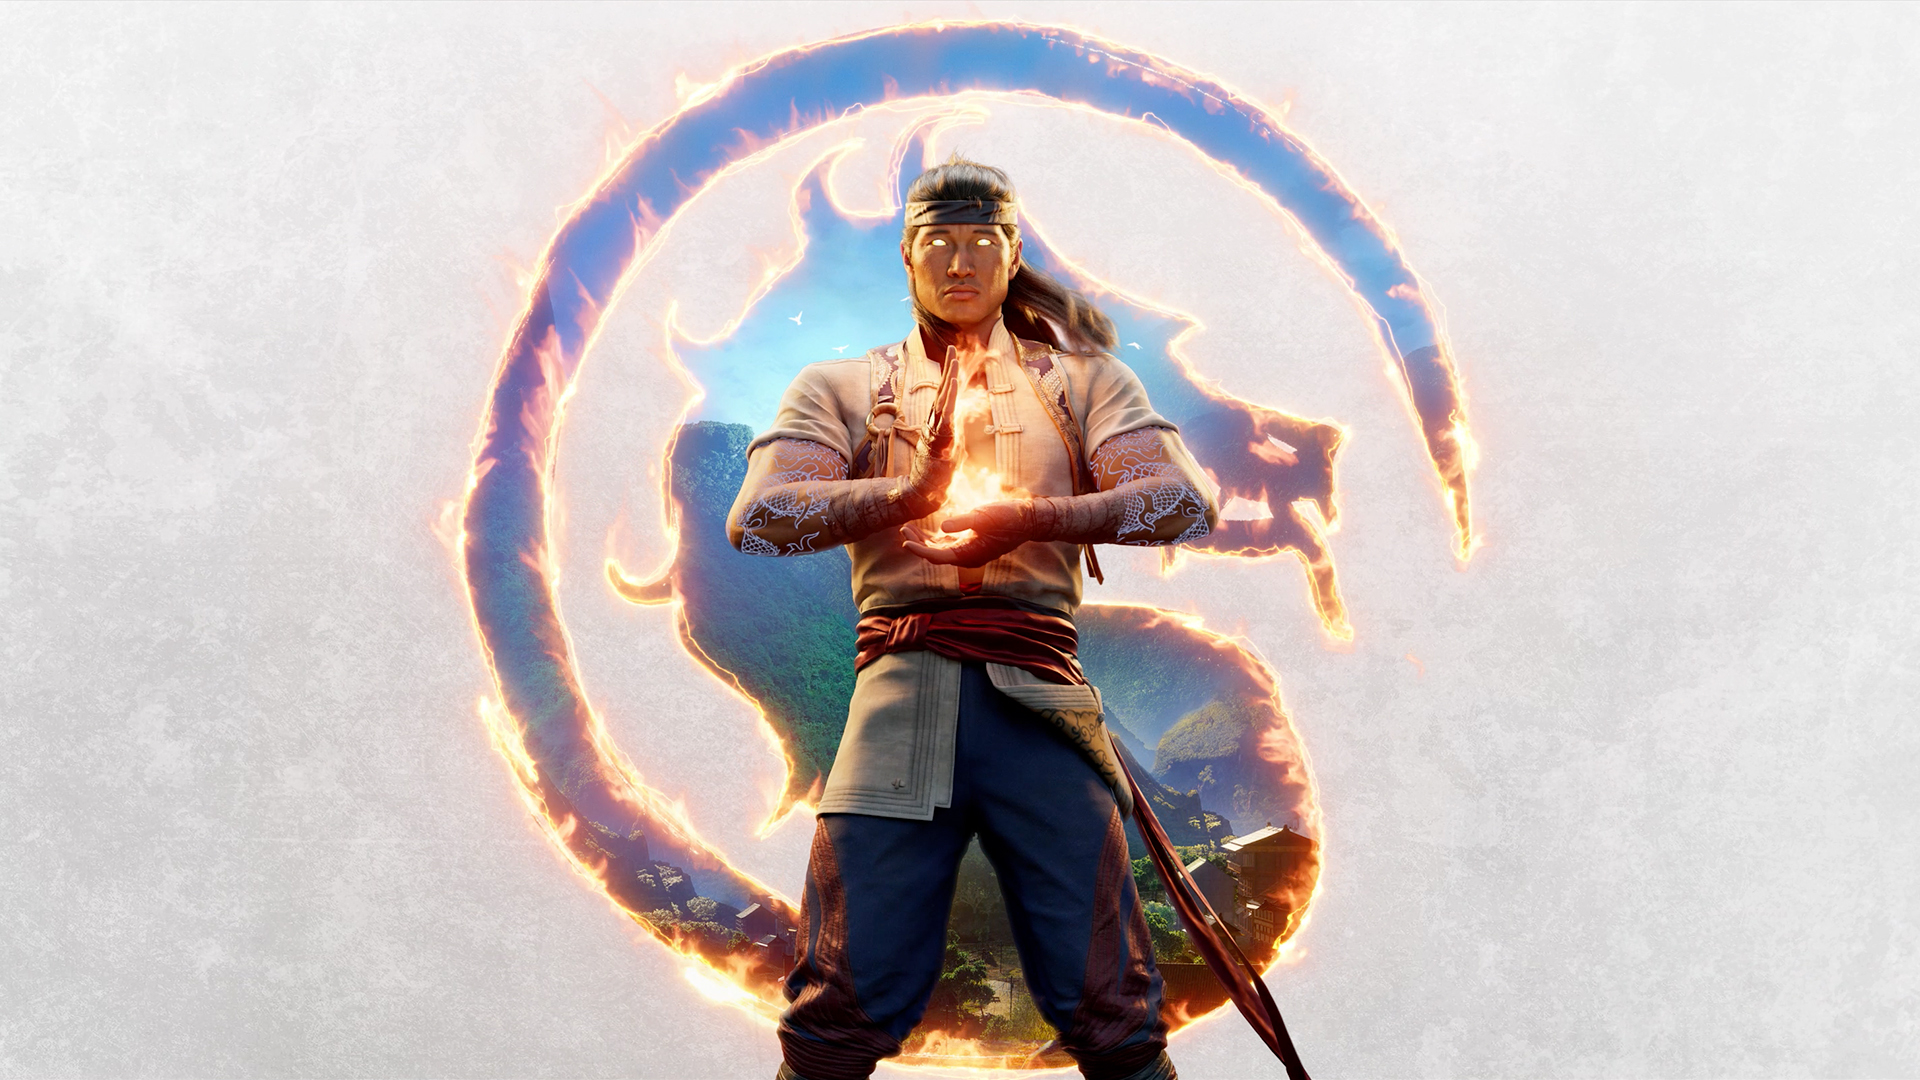 Fire God Liu Kang poses in front of a burning Mortal Kombat logo, which reveals a mountain village behind him